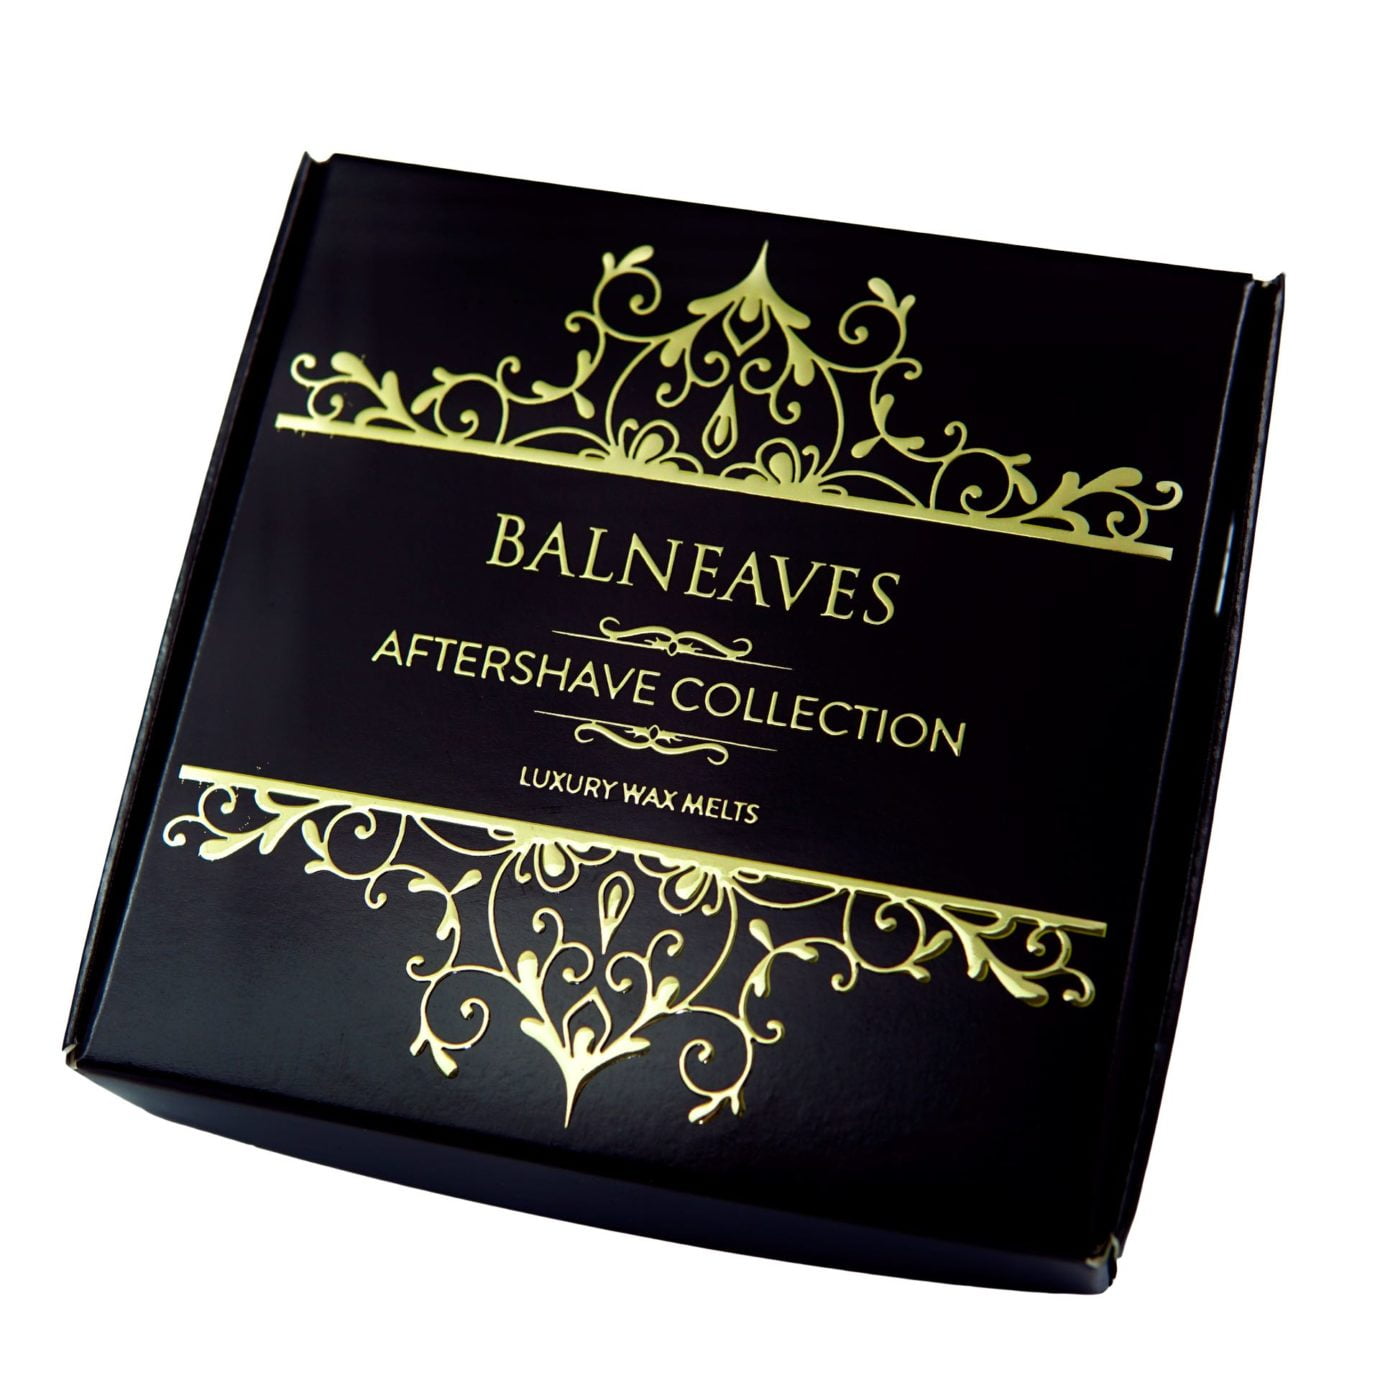 Balneaves Aftershave Collection Wax Melt Sample Box